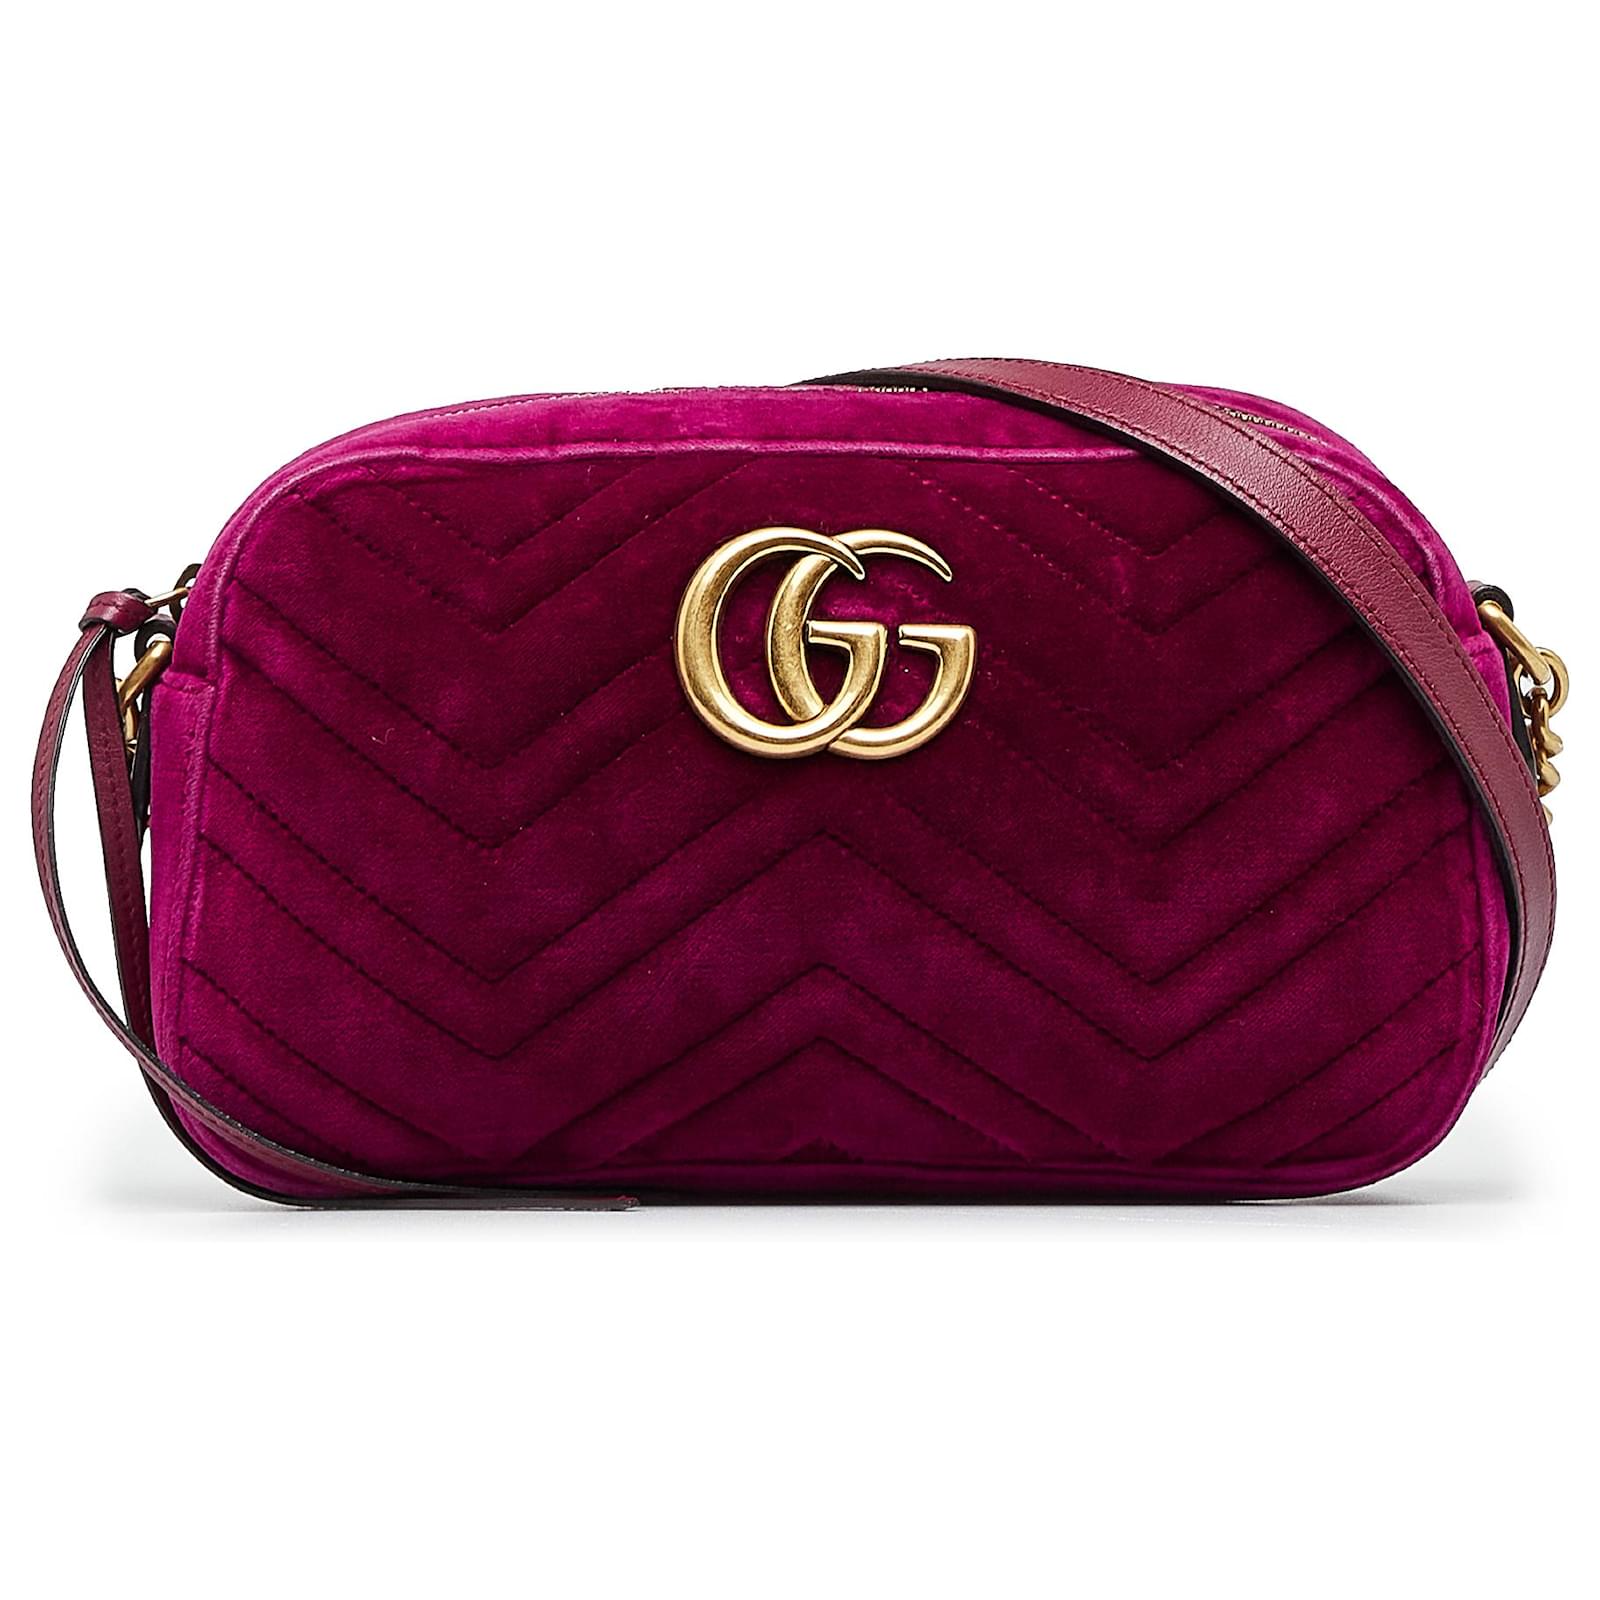 GG Marmont Small Leather Shoulder Bag in Purple - Gucci